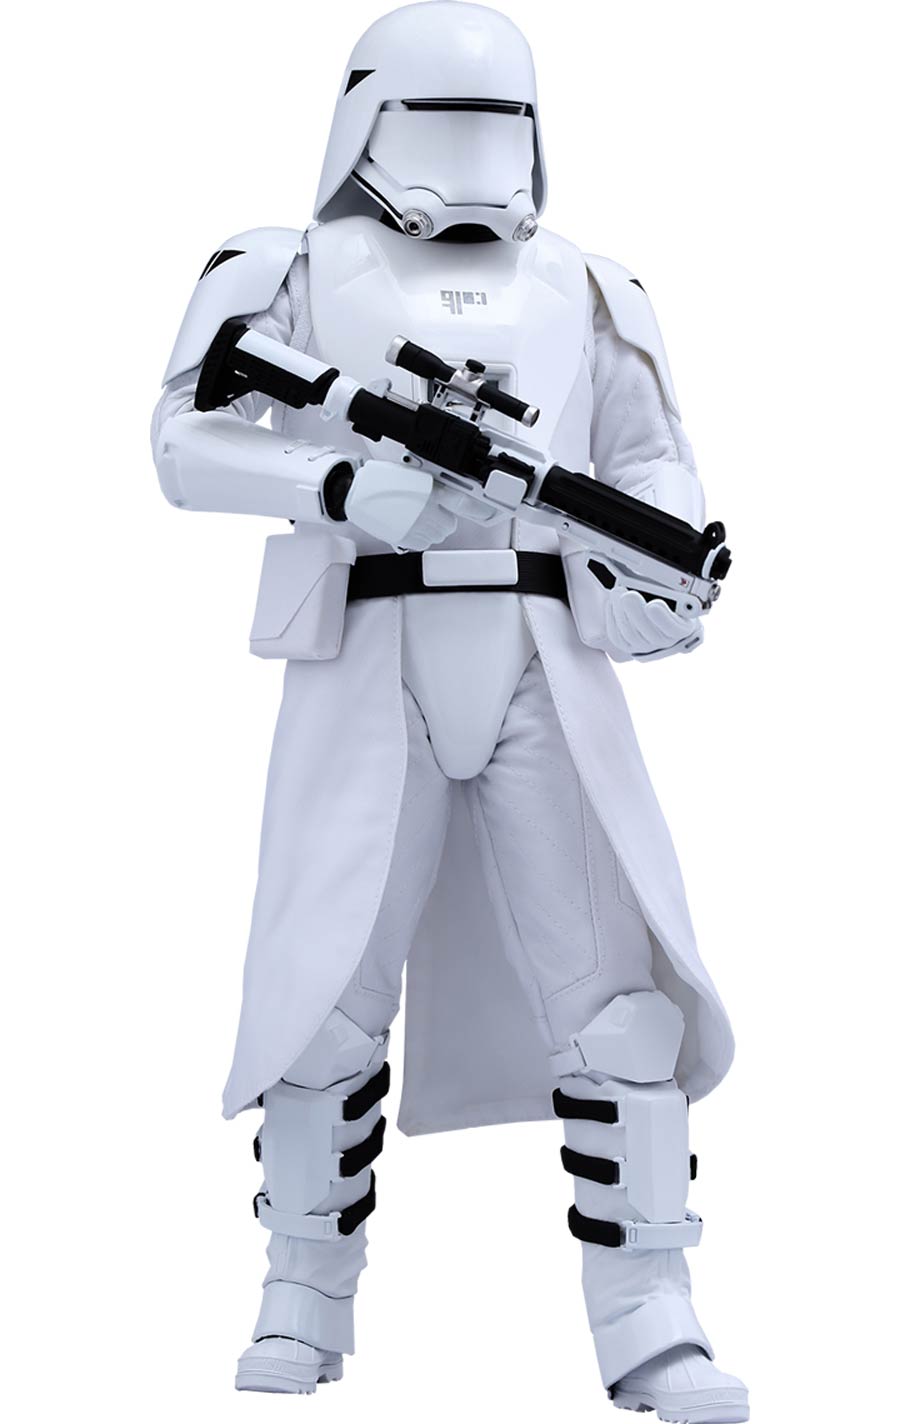 Star Wars Episode VII The Force Awakens First Order Snowtrooper 12-Inch Action Figure